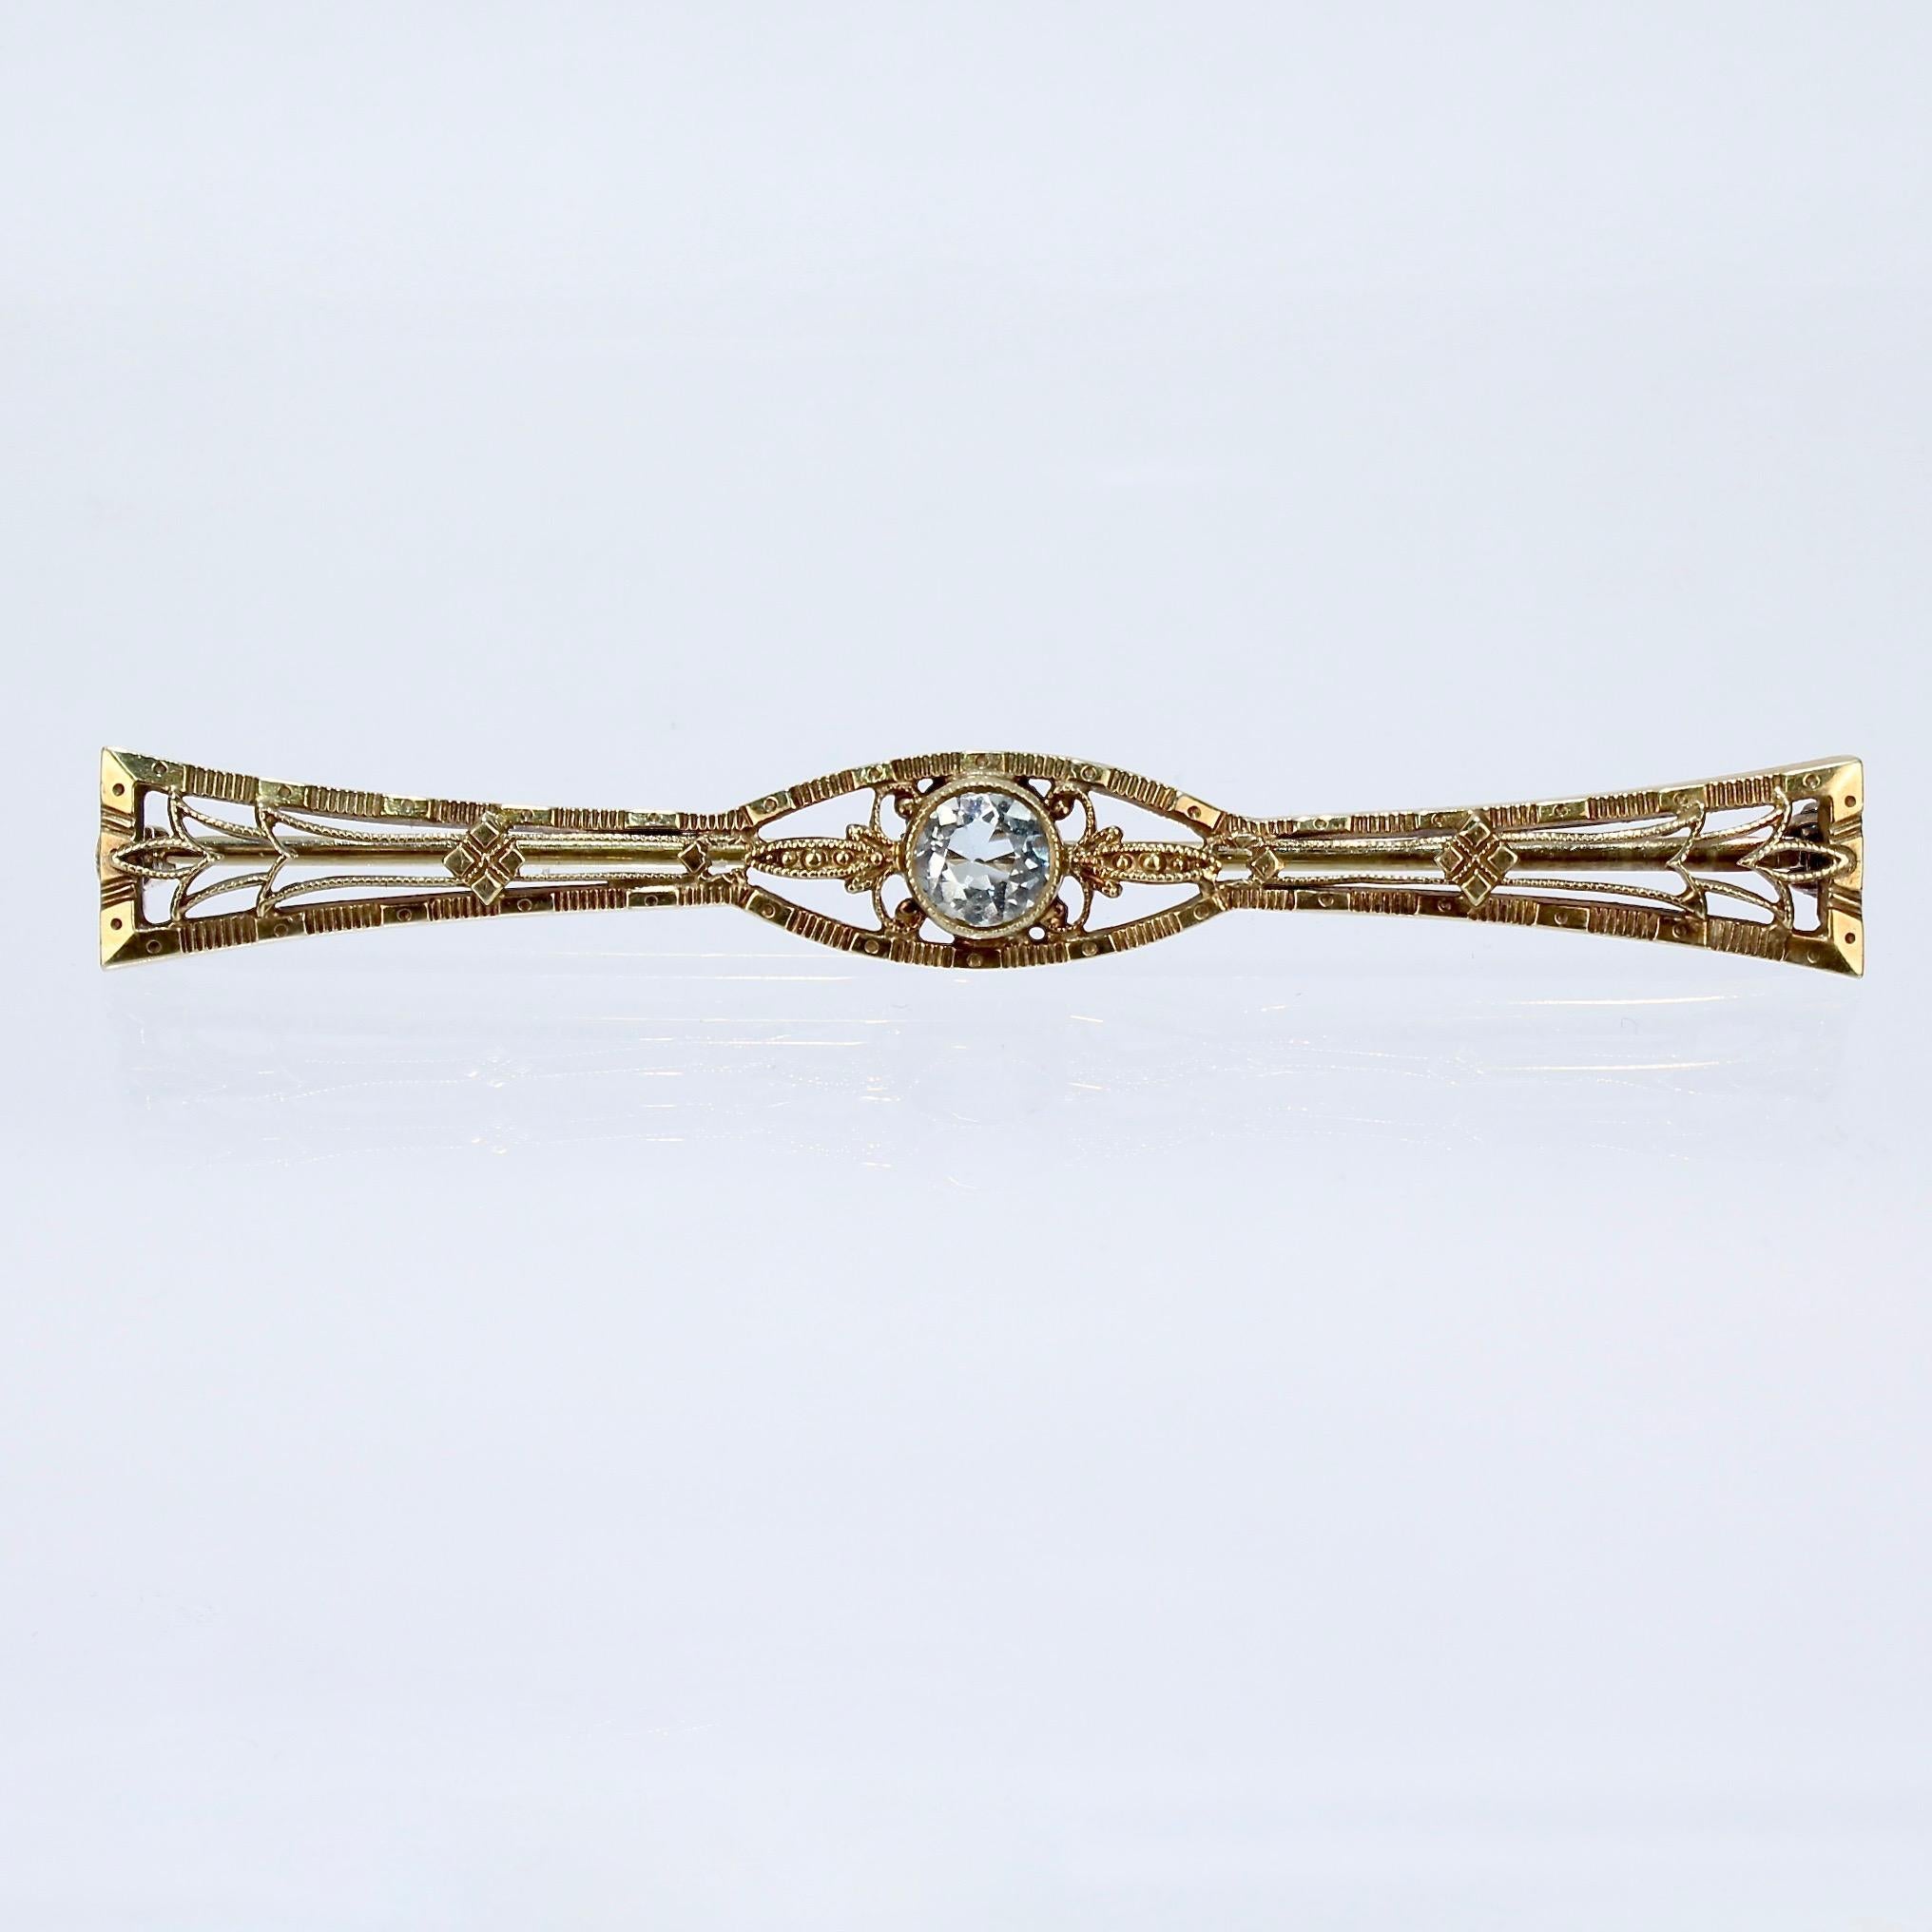 A fine Edwardian gold and aquamarine pin in the form of a bow tie.

With a round light blue aquamarine gemstone set in a gold filigree setting.

Simply a fine, stylish antique pin!

Length: ca. 57 mm

Items purchased from this dealer must delight